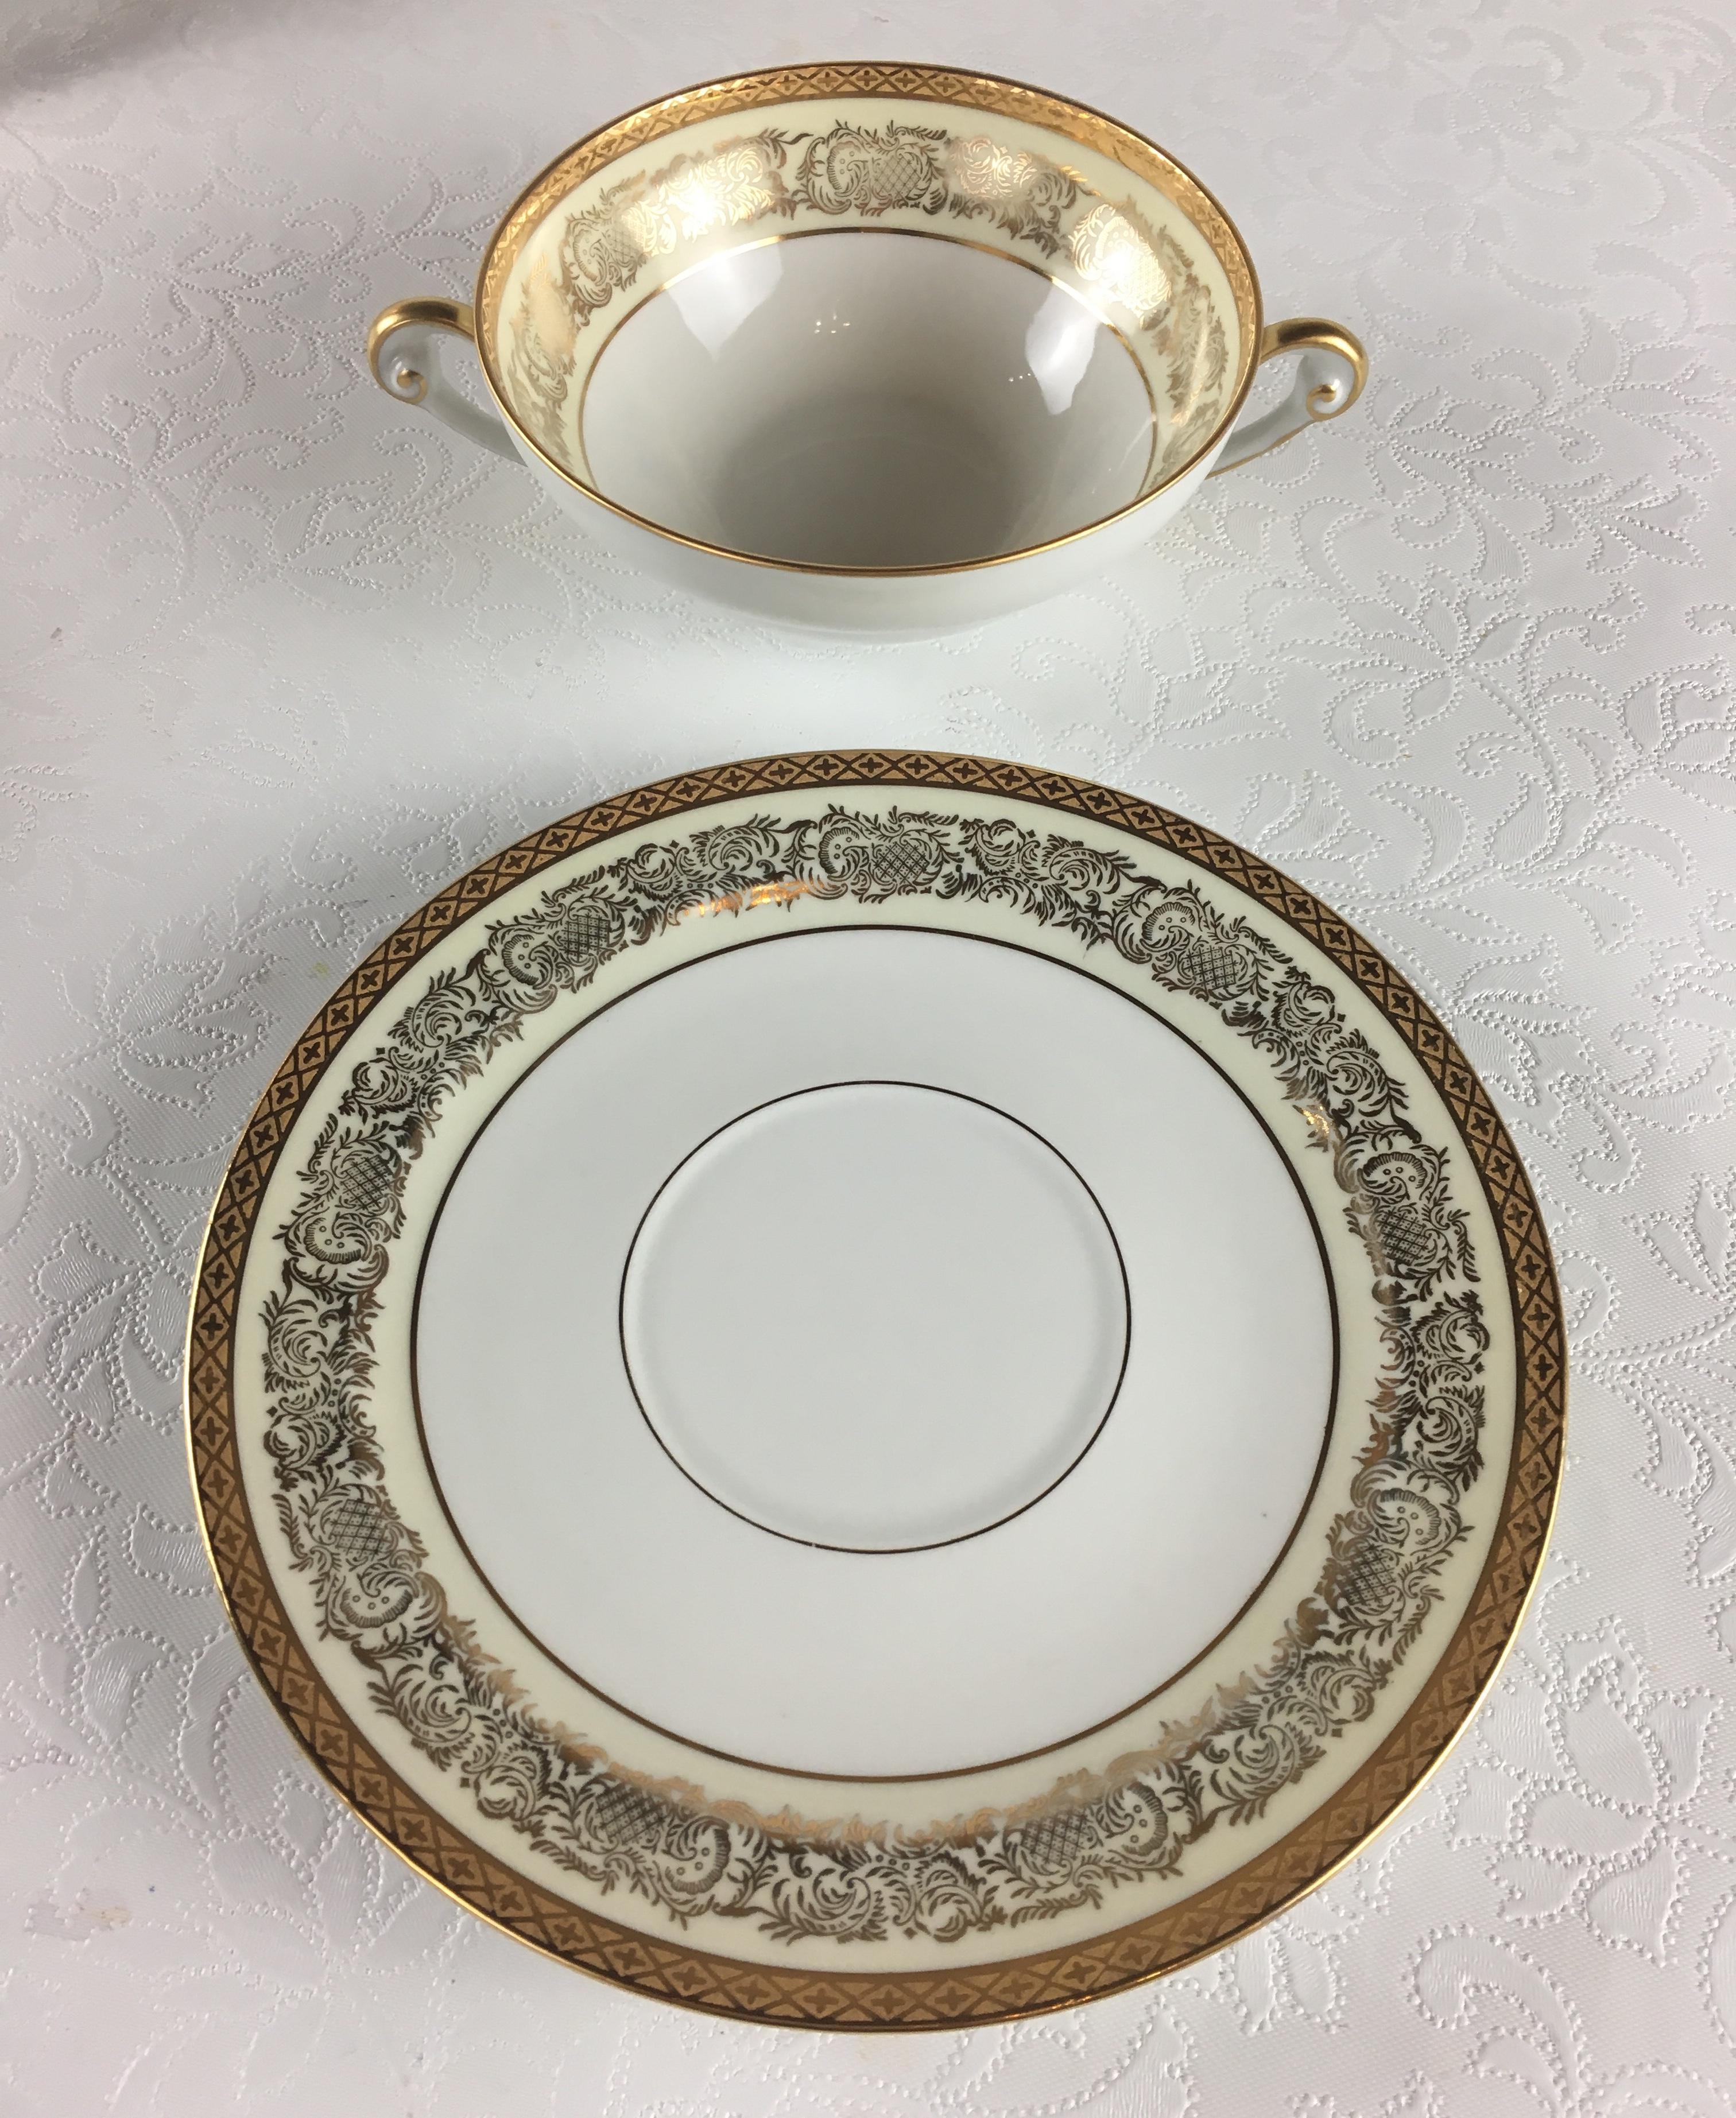 Neoclassical Limoges Porcelain Gold Rimmed Dinner Service 70 pieces, Signed For Sale 1